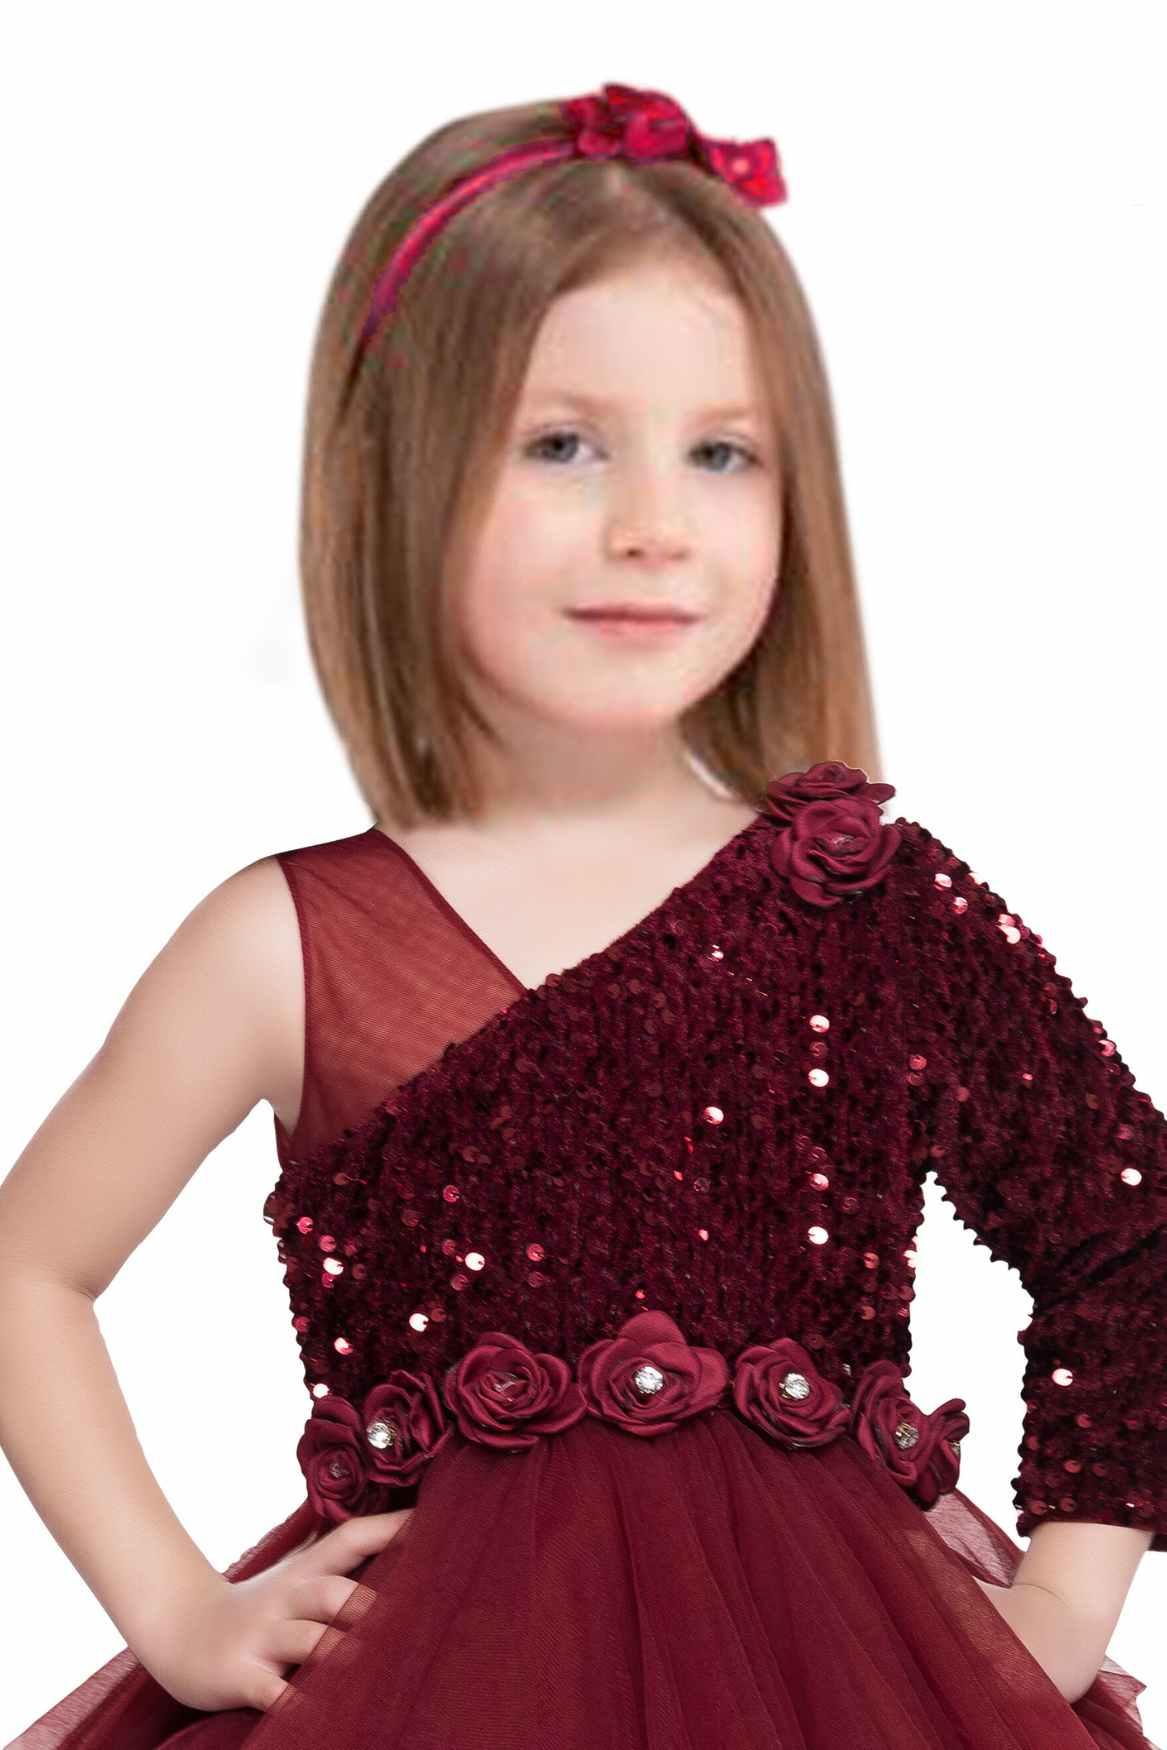 Designer Multilayer Maroon Gown With Floral Embellishments For Girls - Lagorii Kids